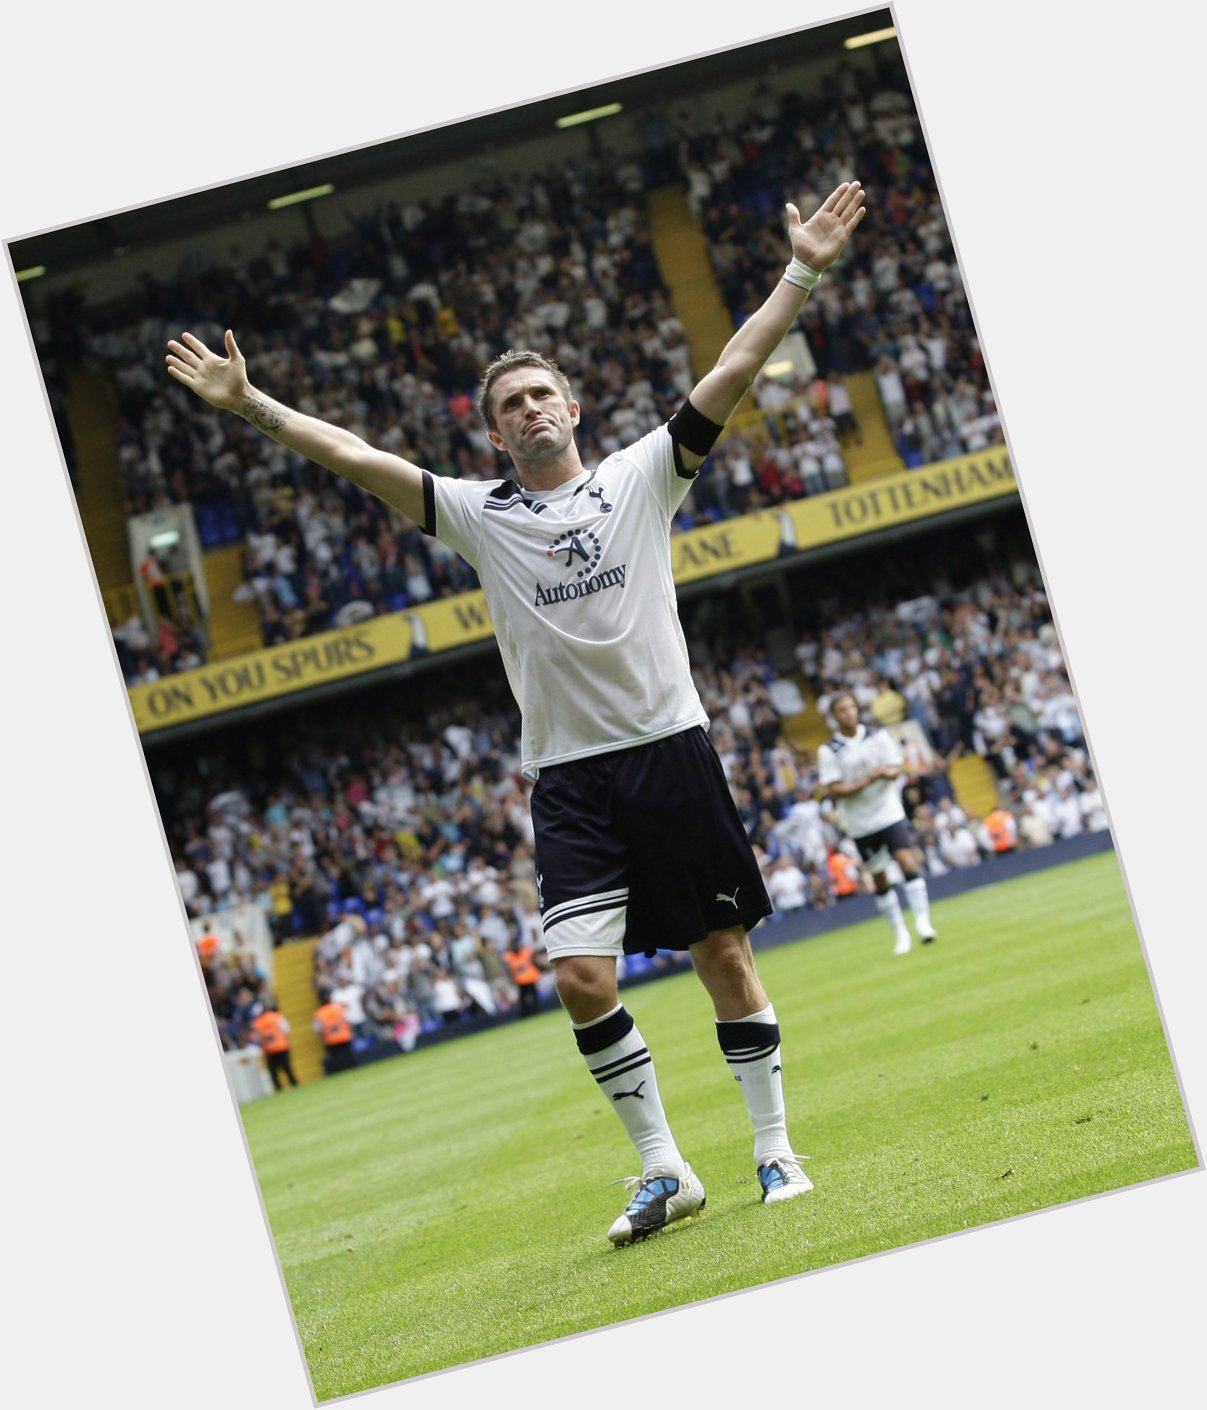 A big happy birthday as well to Robbie Keane. Have a great day, Keano!   